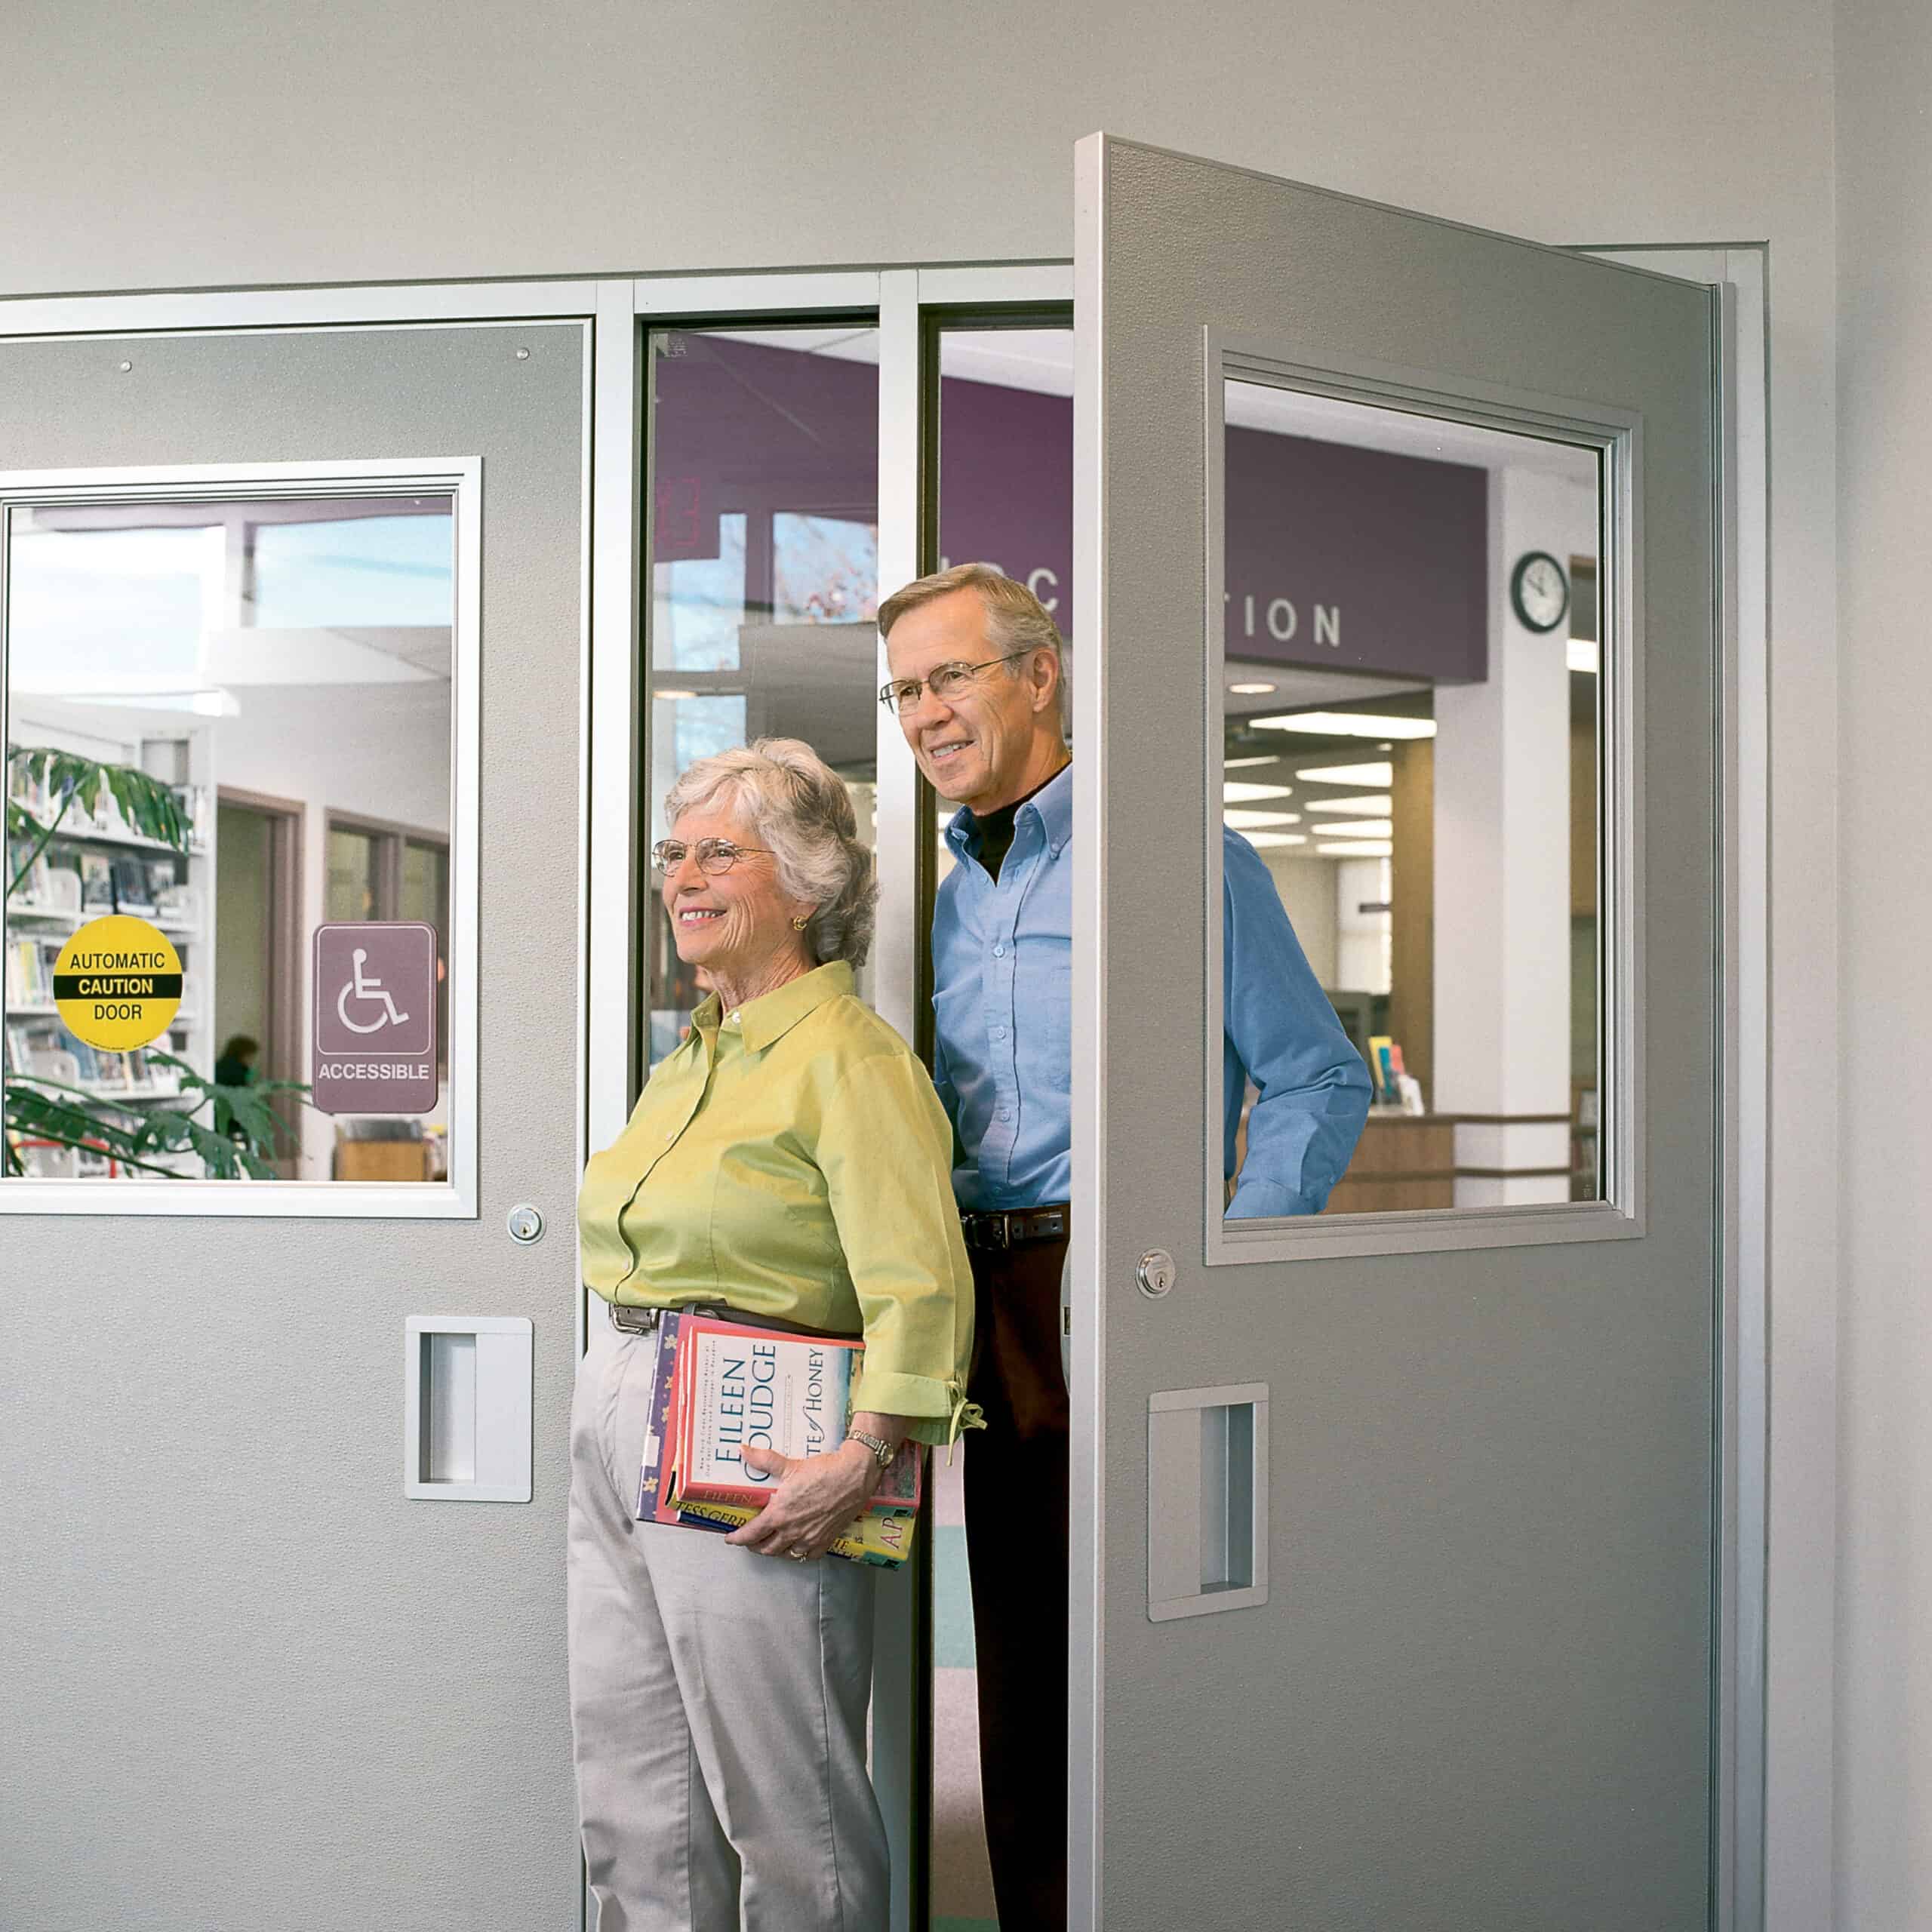 A man and a woman standing in front of a door.